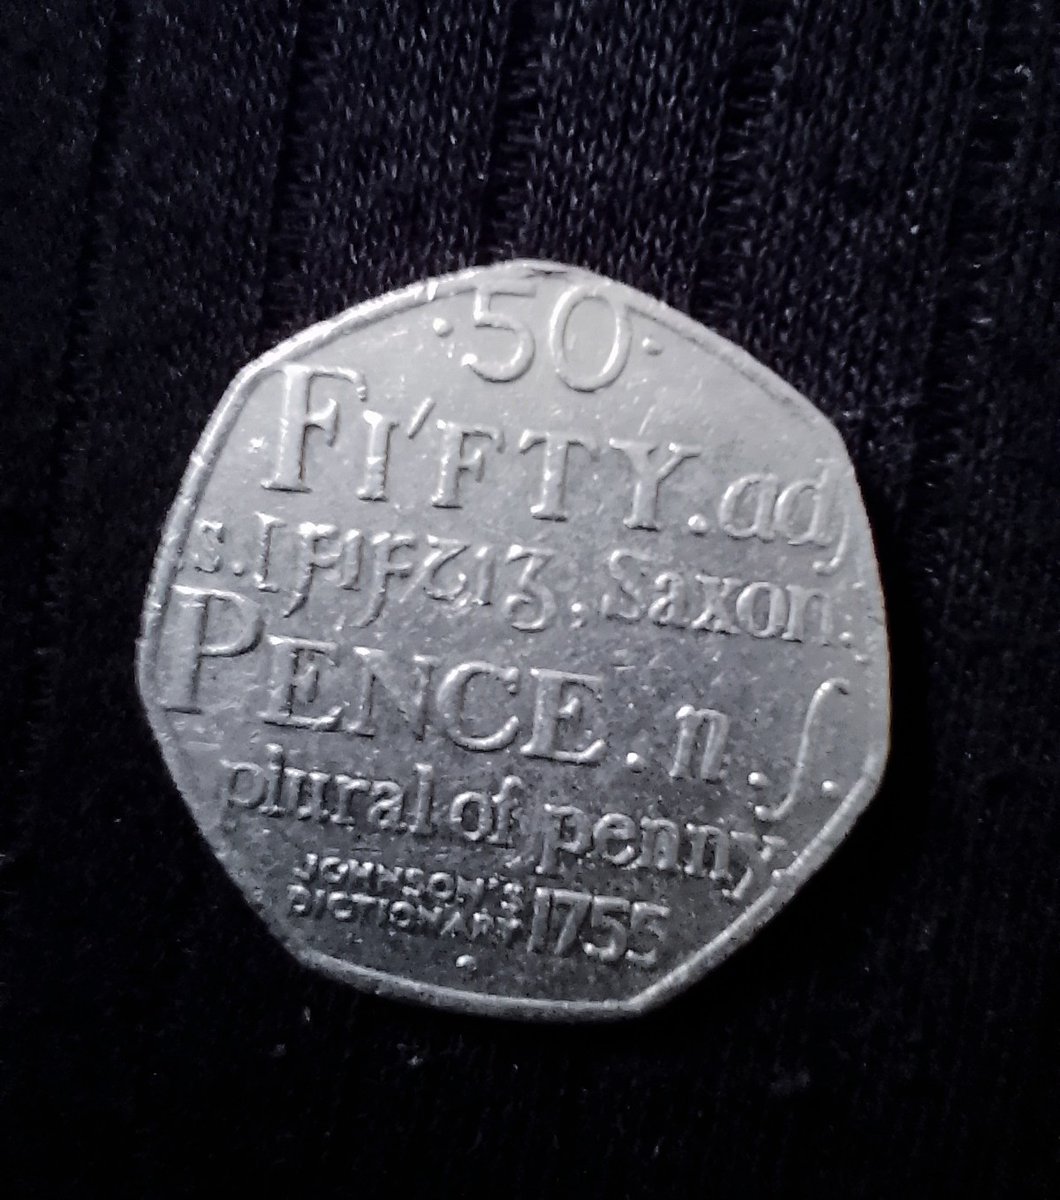 Got this 50p in change yesterday. I didn't know Fi'fty dated to Saxon times
#language #originofwords #50p #Coins